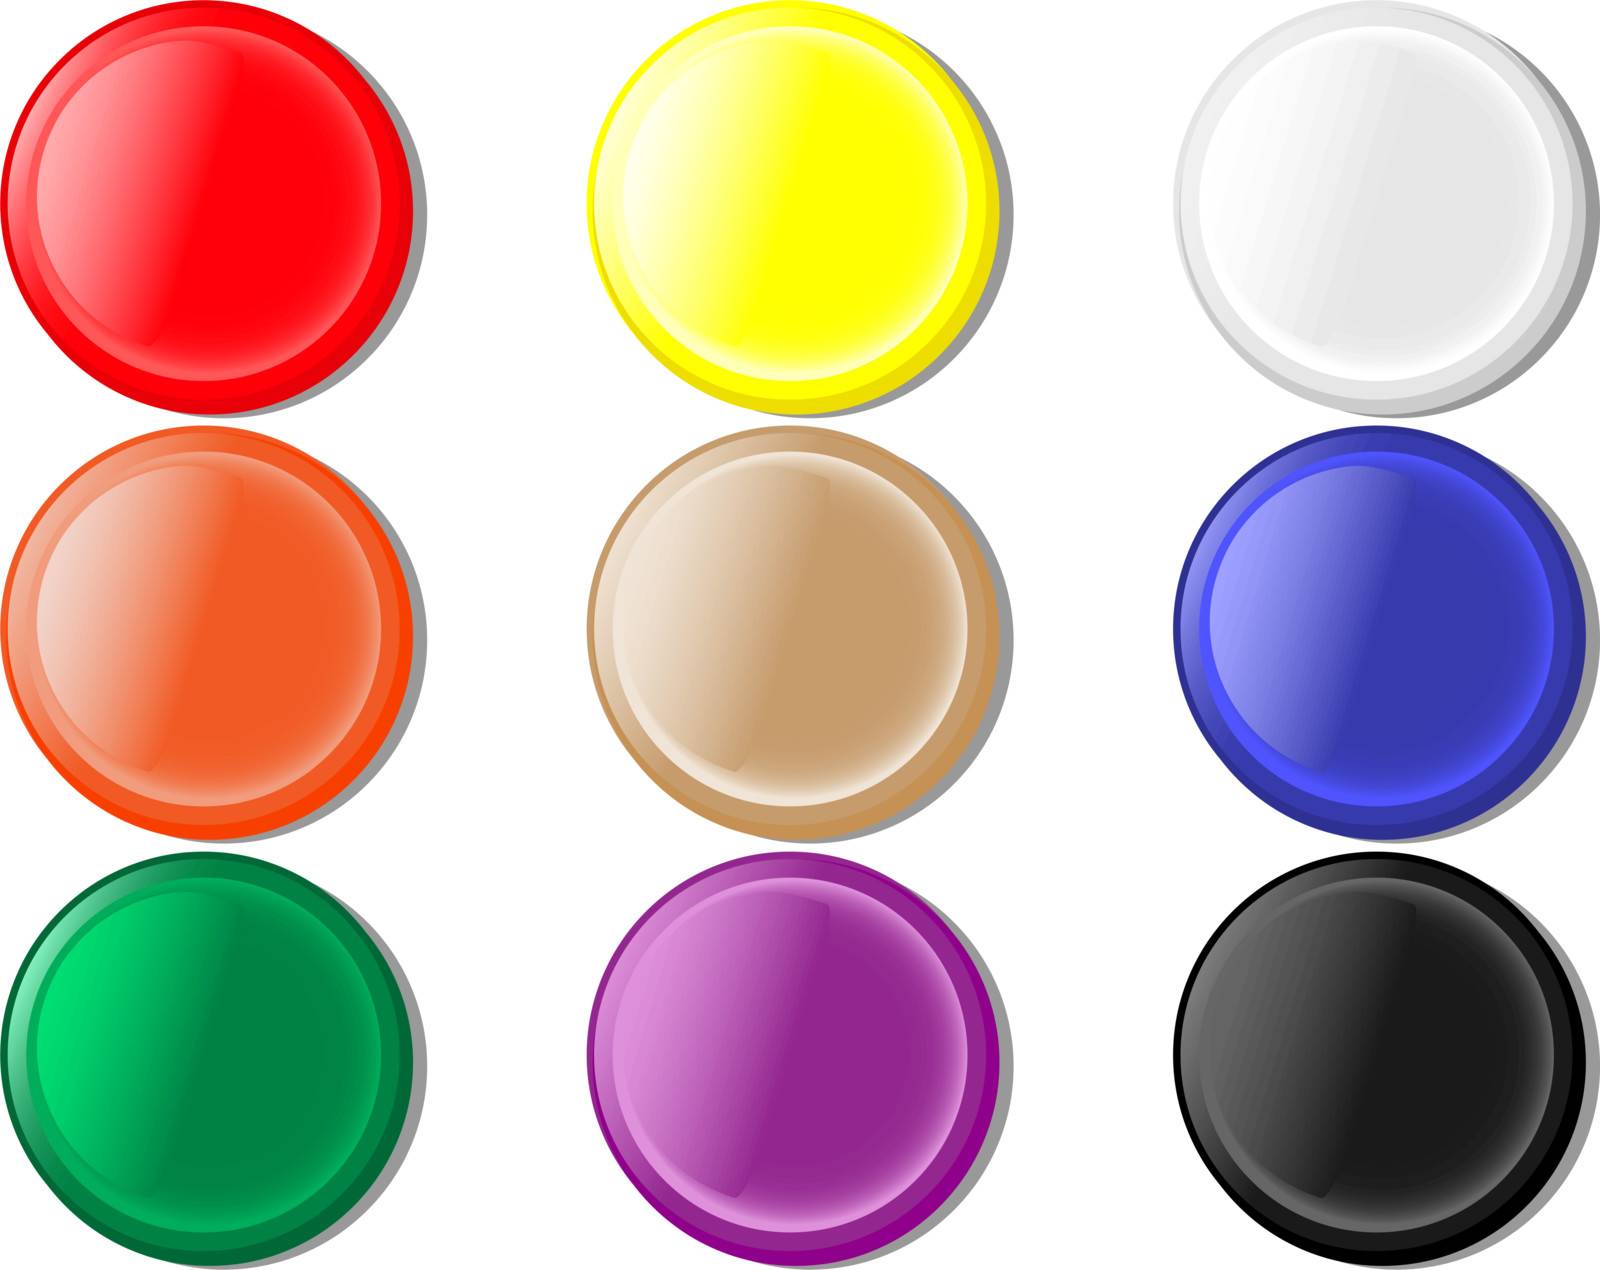 Vector illustration of round buttons